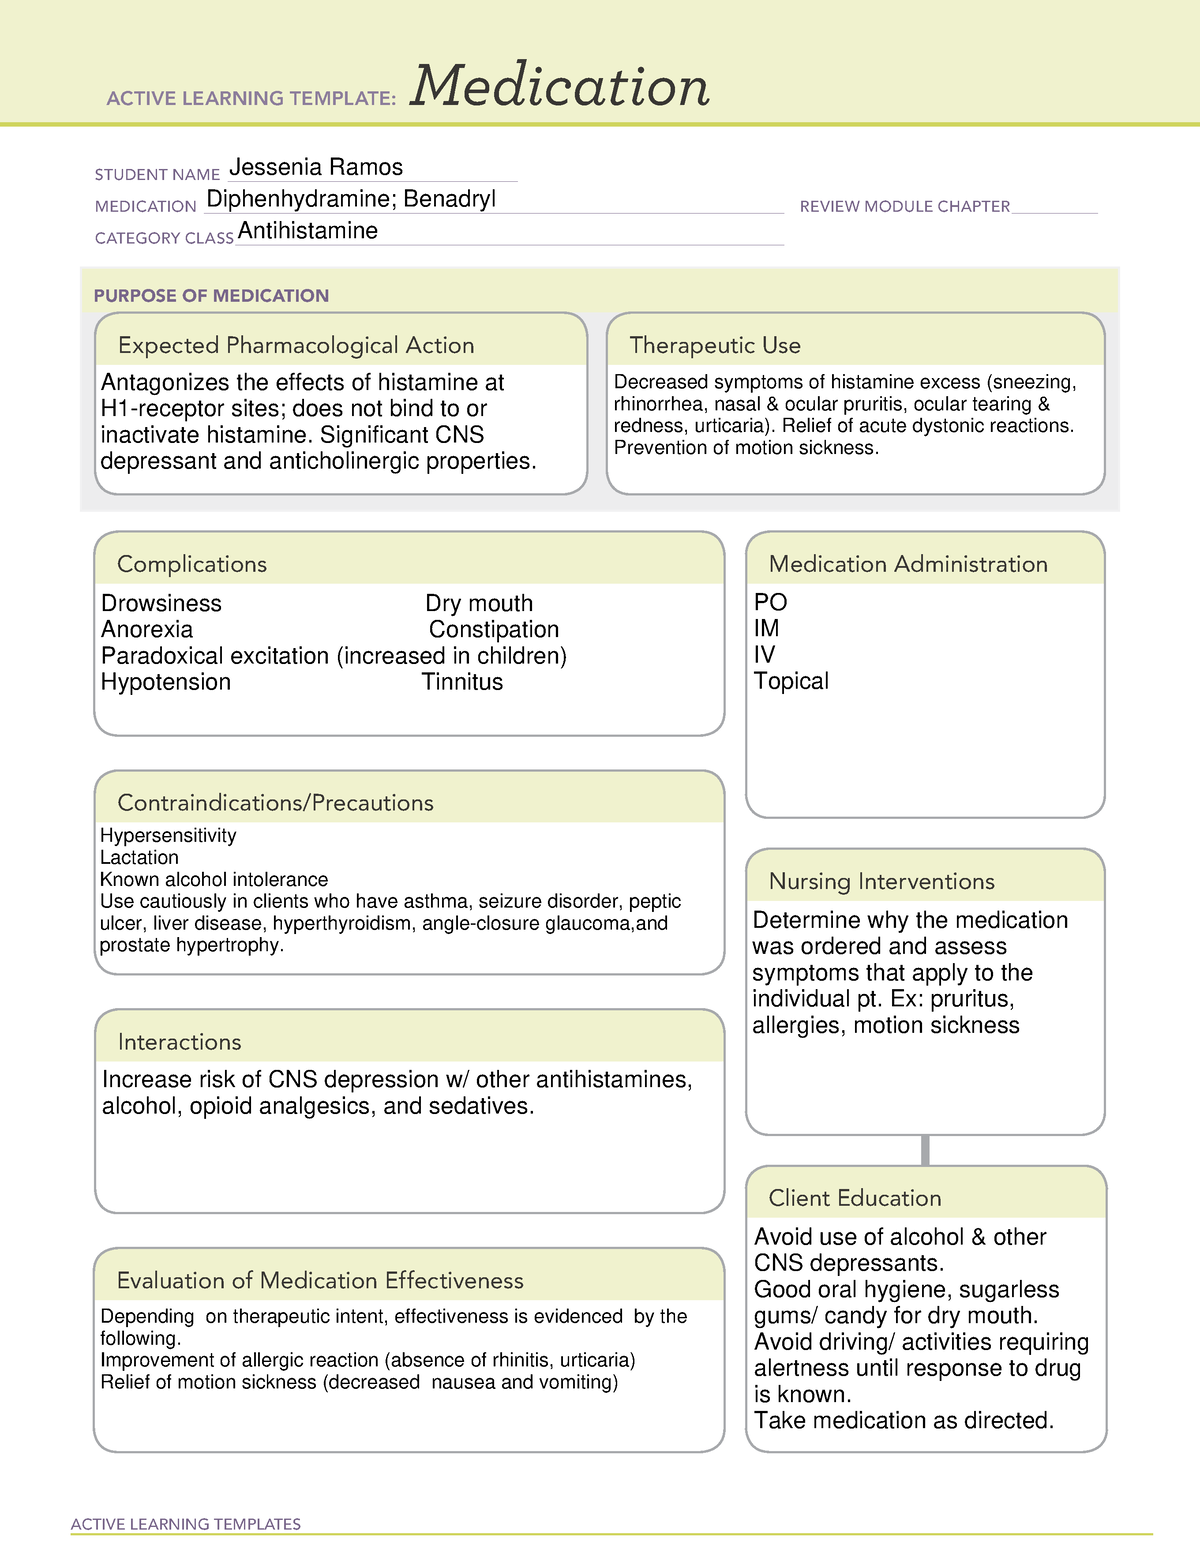 Diphenhydramine ATI Medication template for LAB ACTIVE LEARNING